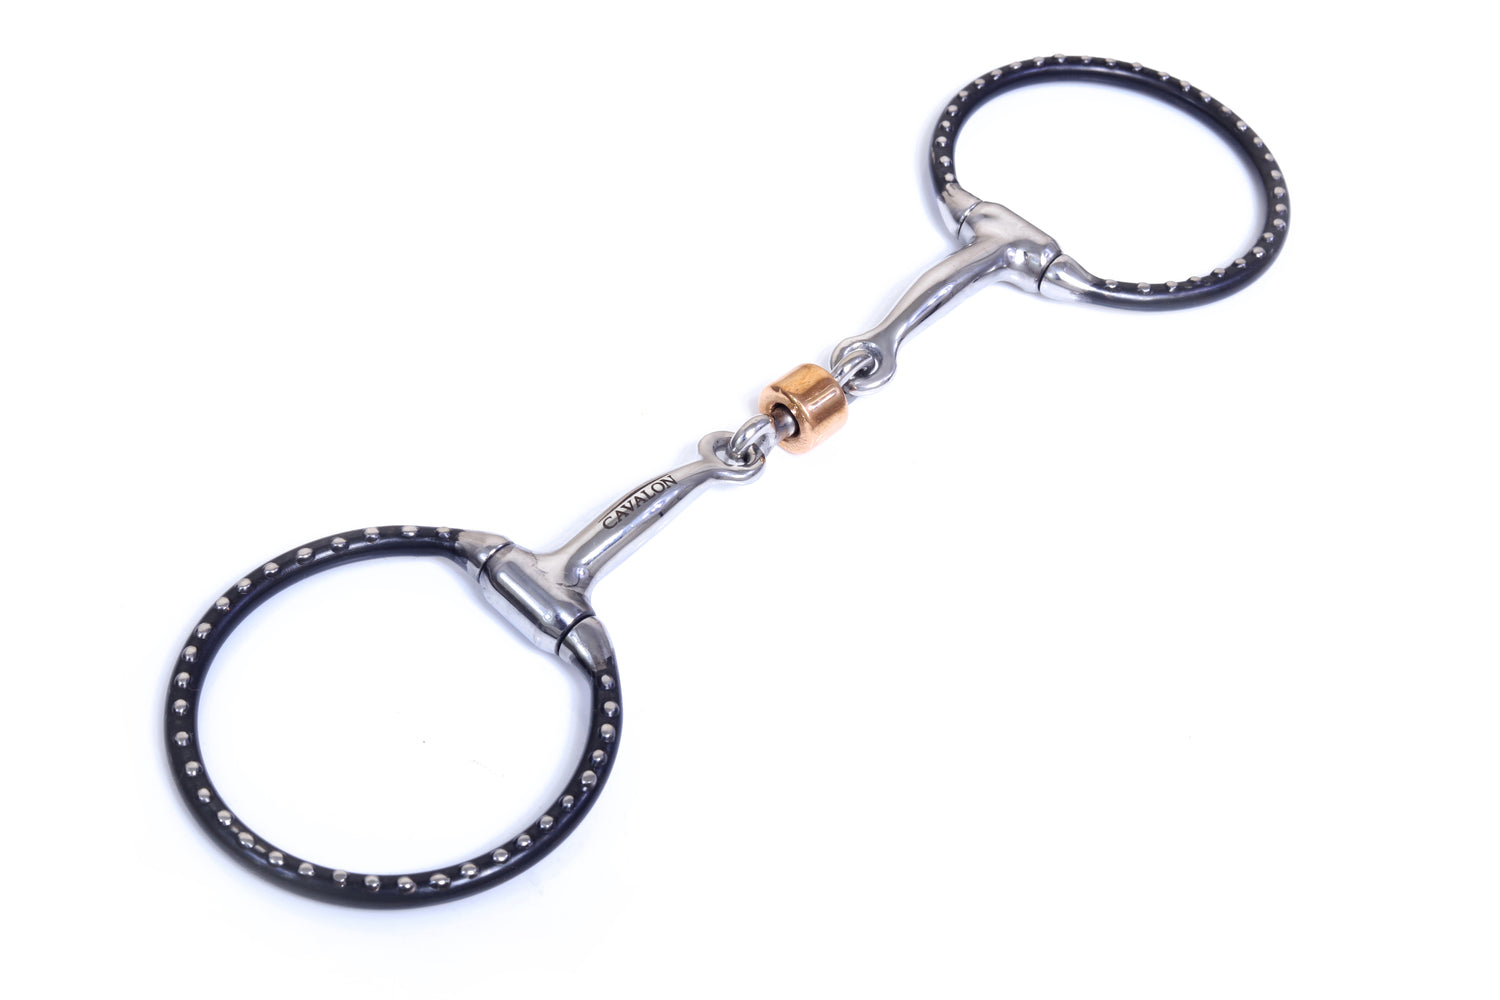 Western D-Ring Barrel Snaffle Bit with Copper Rollers - Cavalon